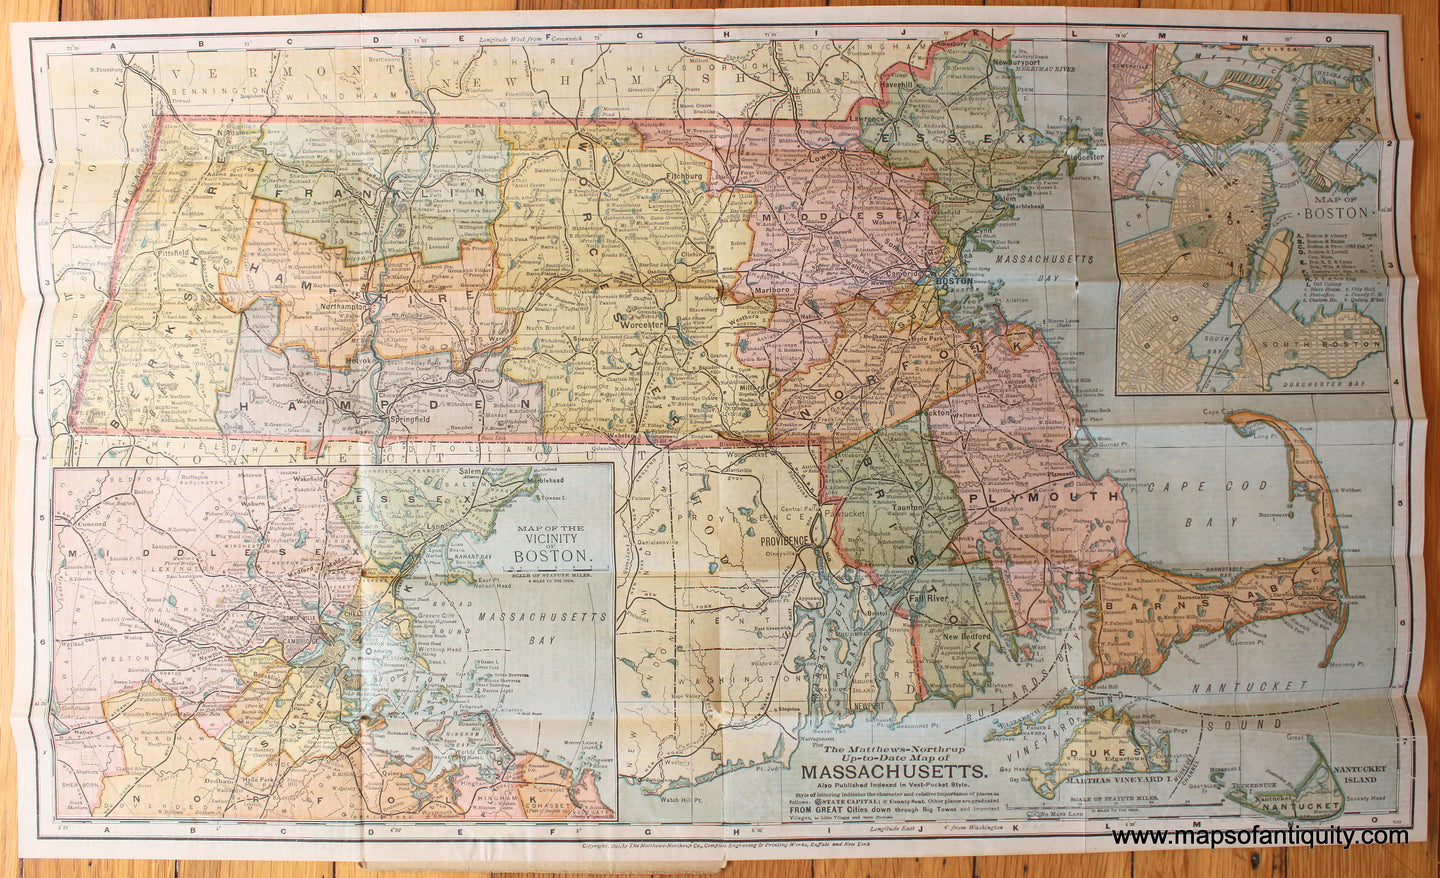 Antique-Printed-Color-Folding-Map-The-Matthews-Northrup-Up-to-Date-Map-of-Massachusetts-Vest-Pocket-Edition-1891-Matthews-Northrup-Company-Massachusetts-1800s-19th-century-Maps-of-Antiquity